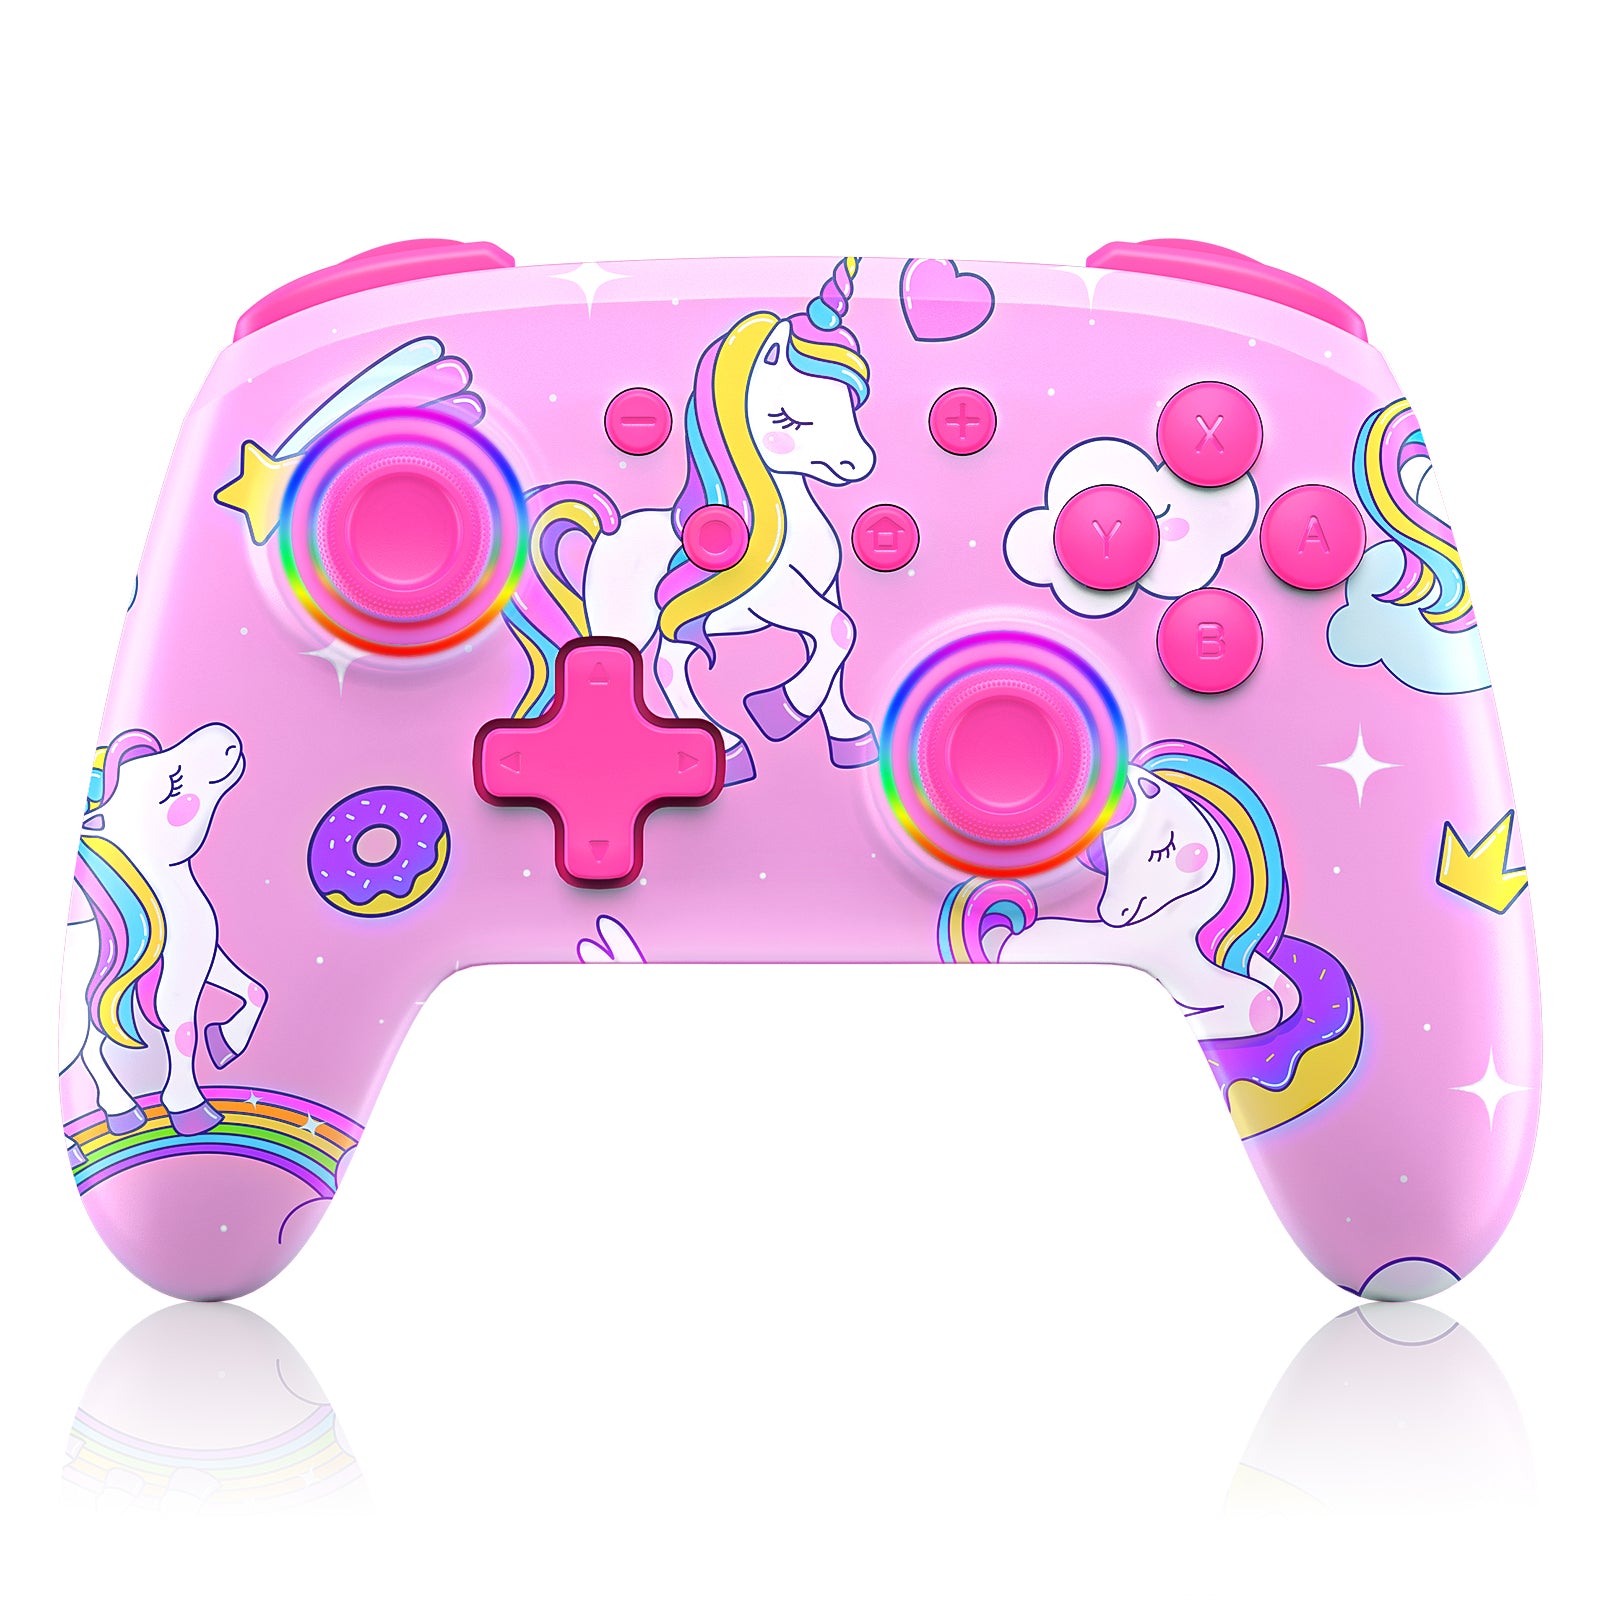 The image displays a Bluetooth controller with a pink unicorn skin